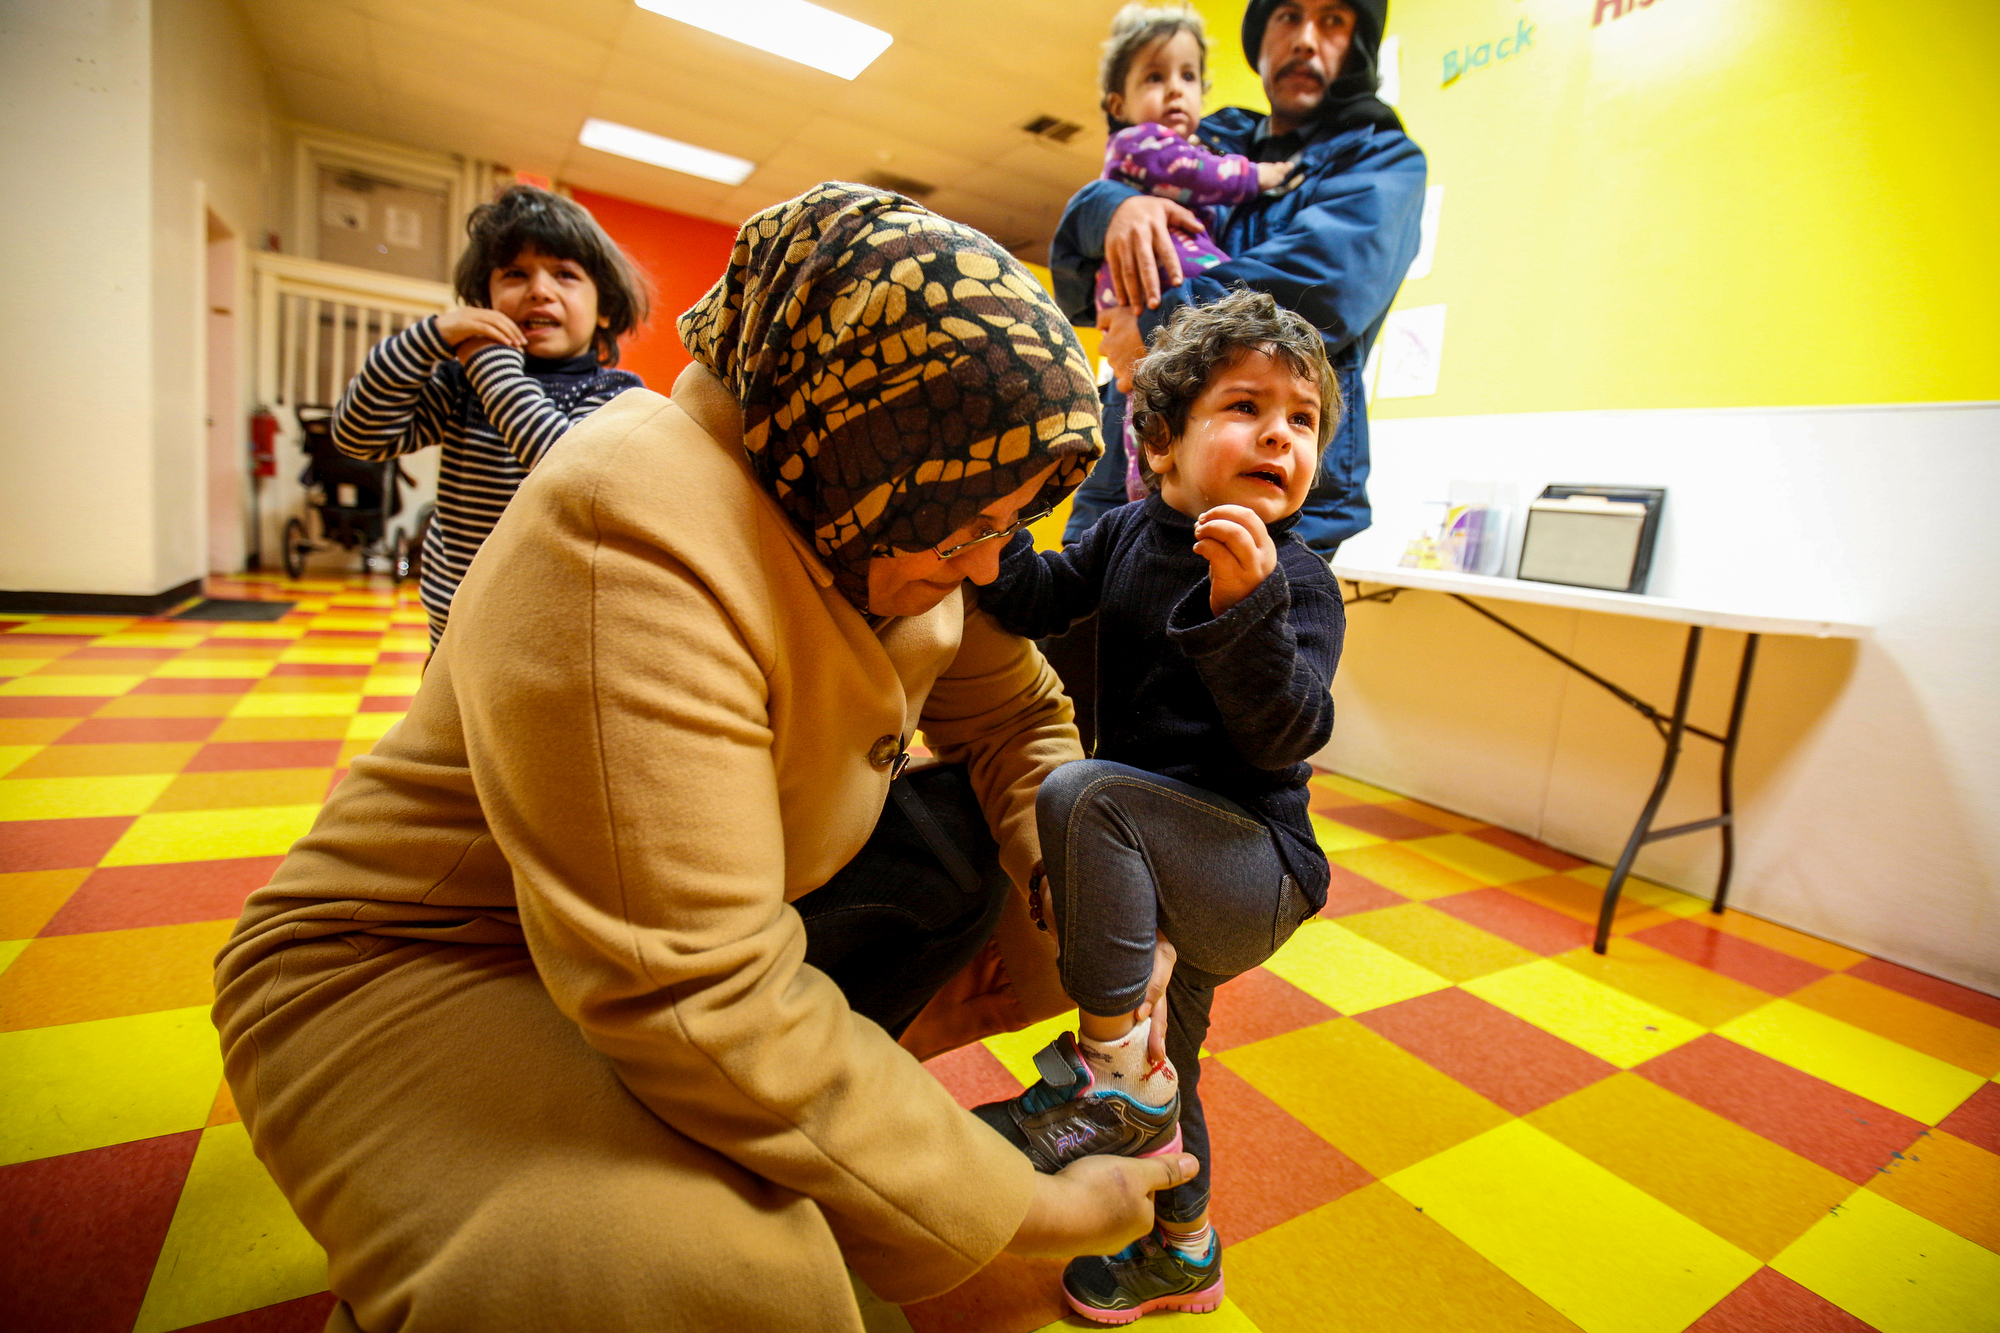  Ahlam Ahlamoud puts on Ghalia’s shoes while dropping the three youngest children off for their third day of day care on Friday, February 19, 2016. 